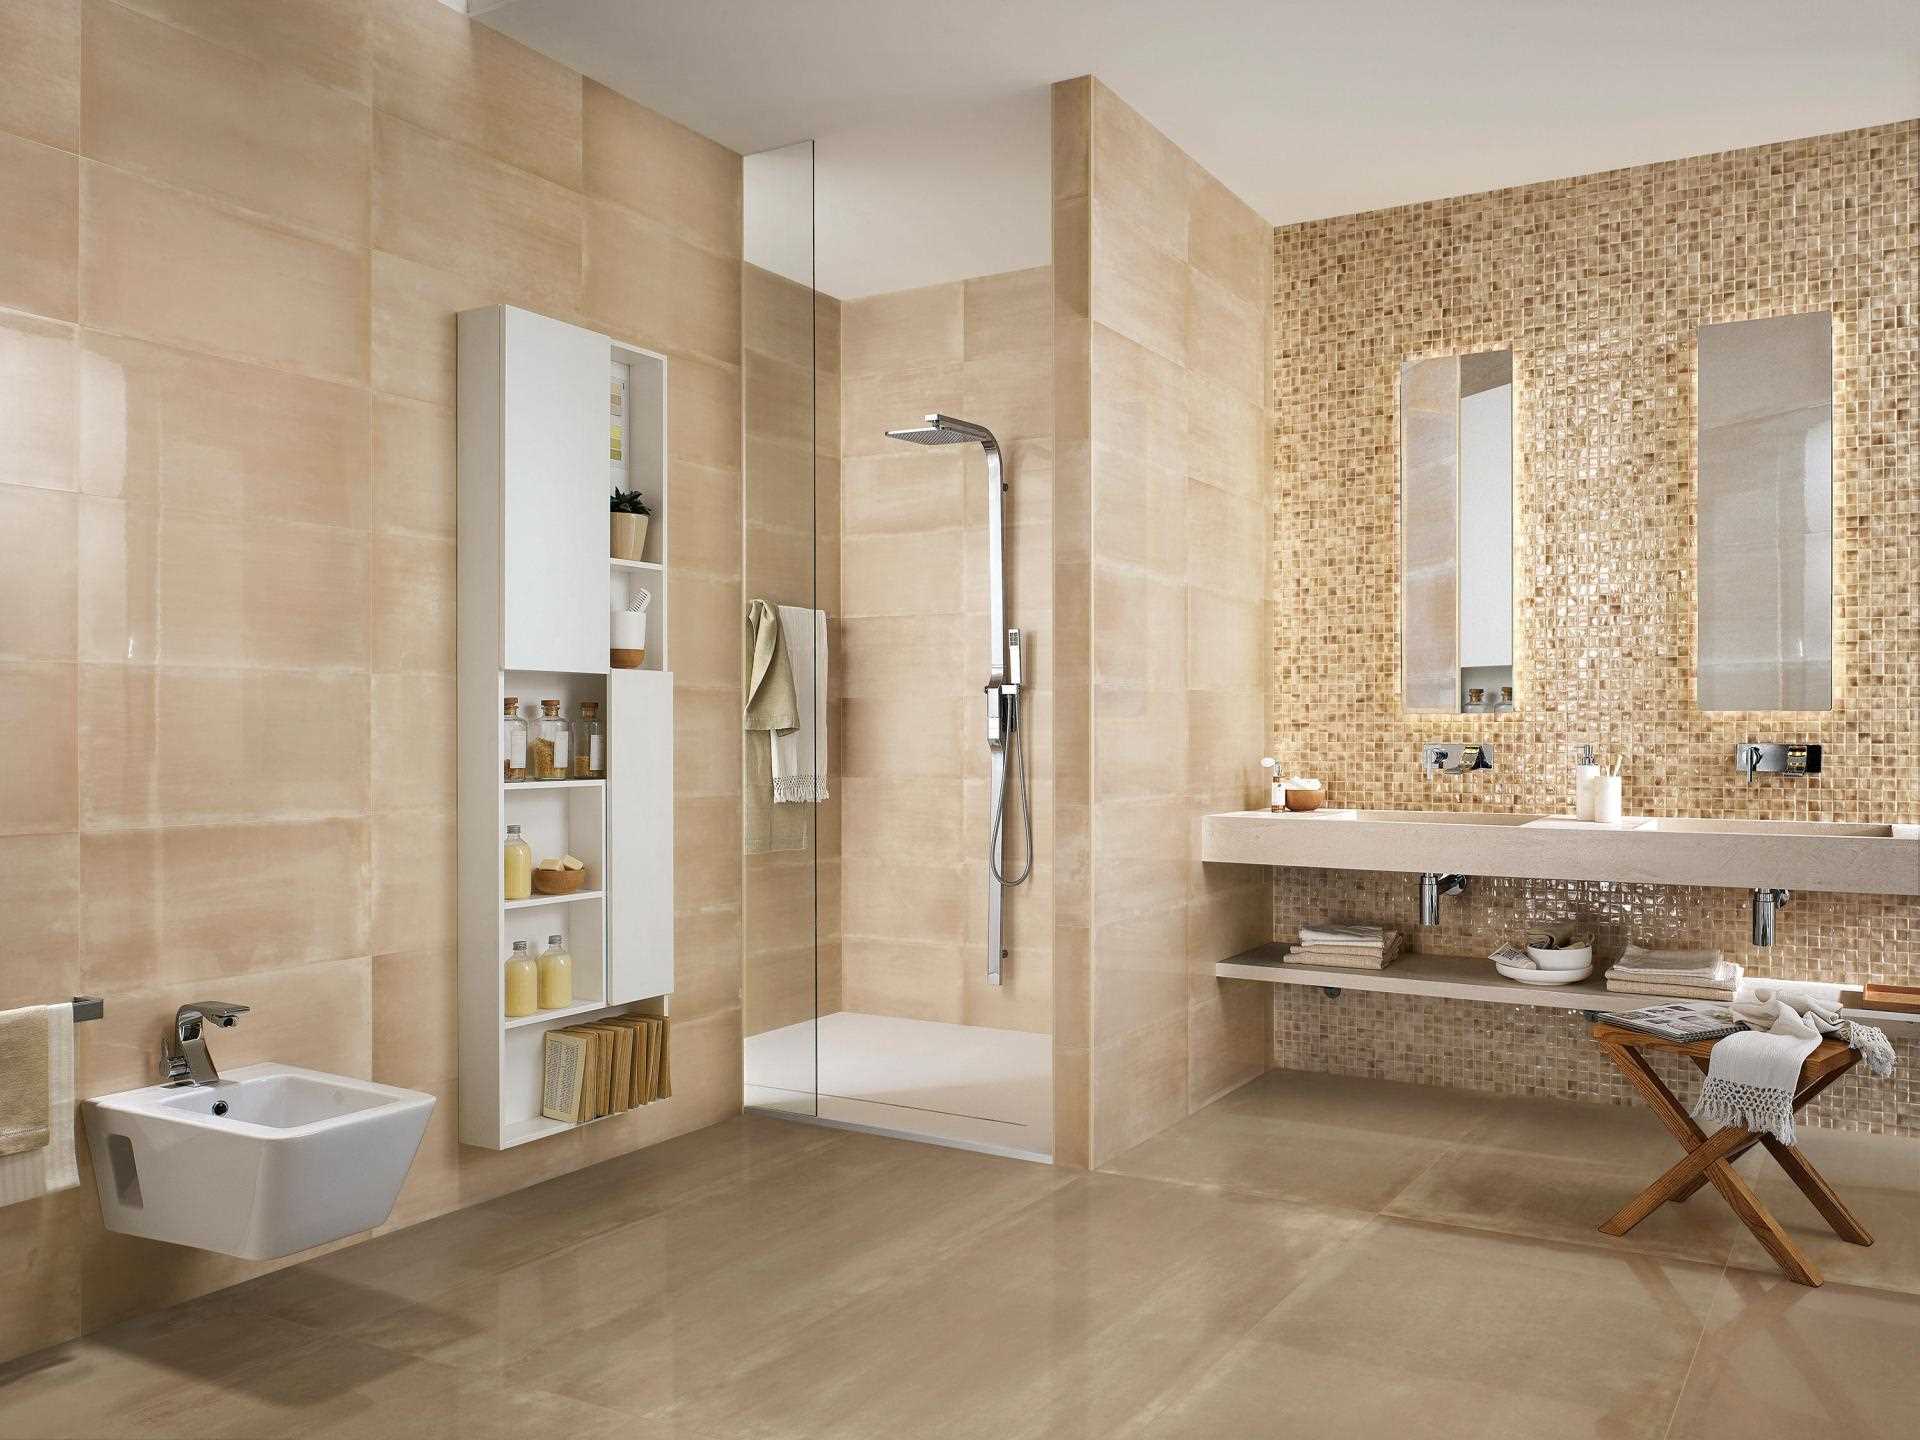 variant of a beautiful bathroom style